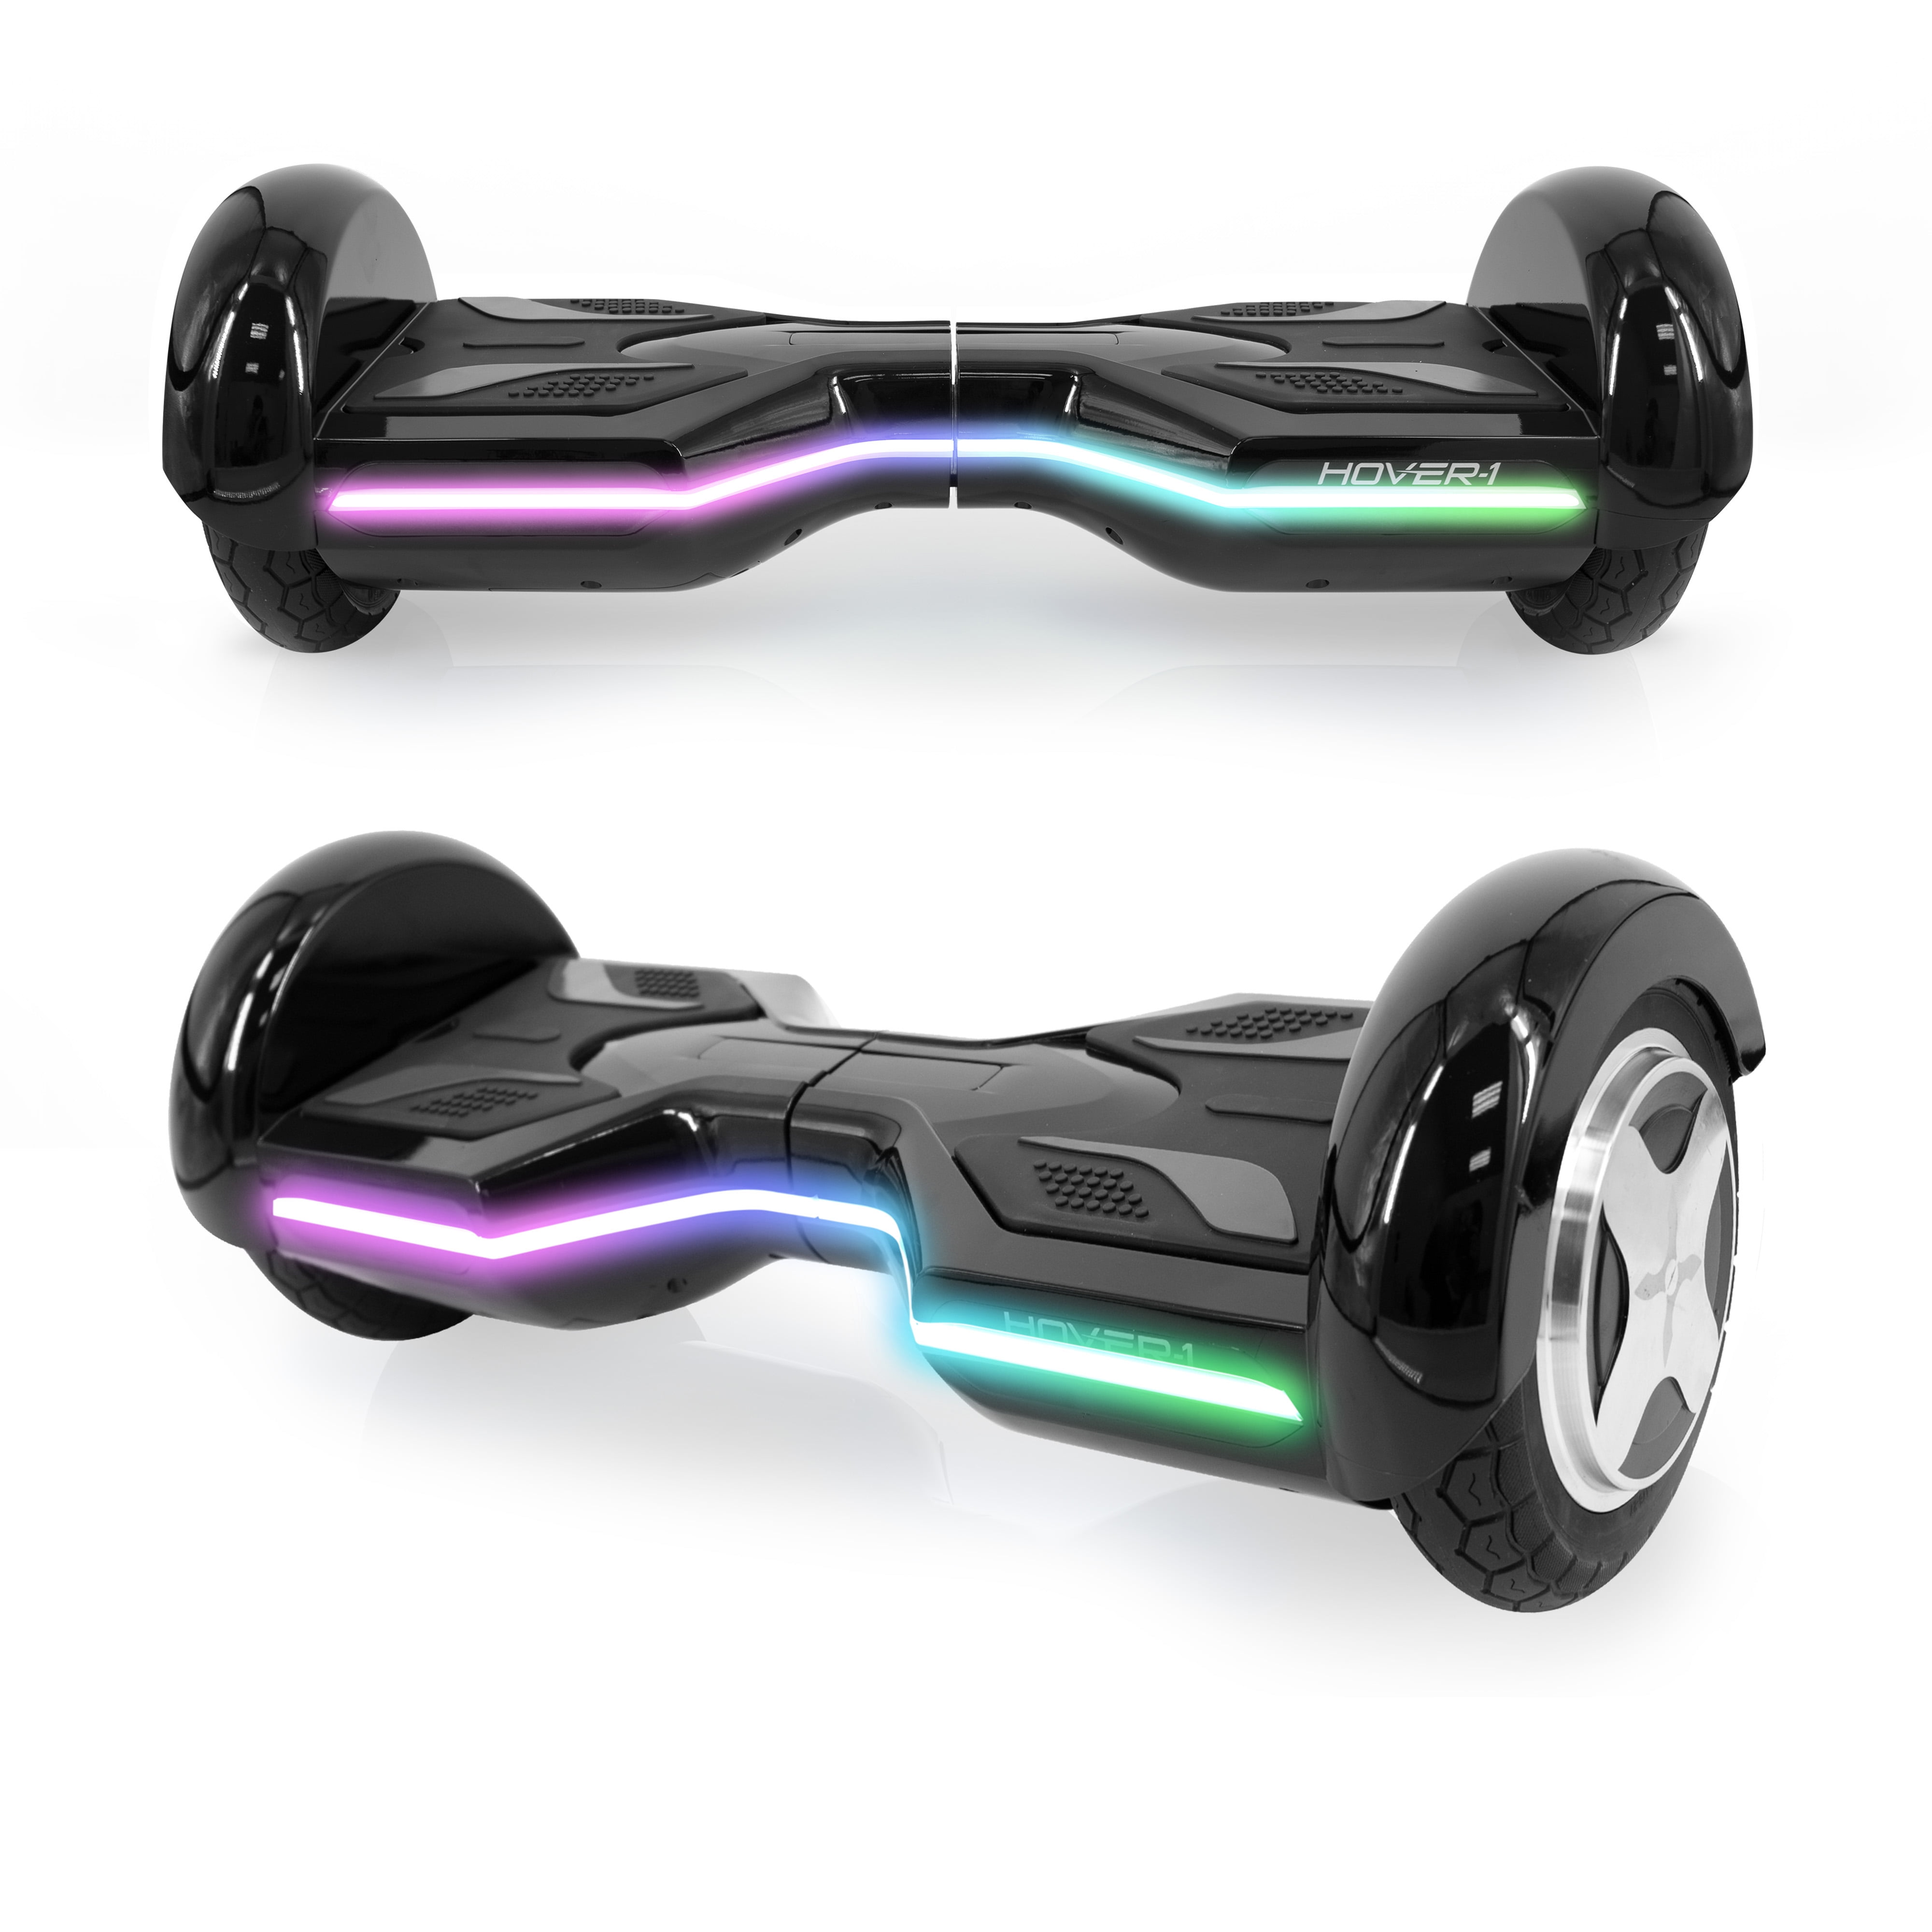 Ховерборд. Электро hoverboard. Hype Hover 1 Electric Scooter. Foxtech Hover 1.